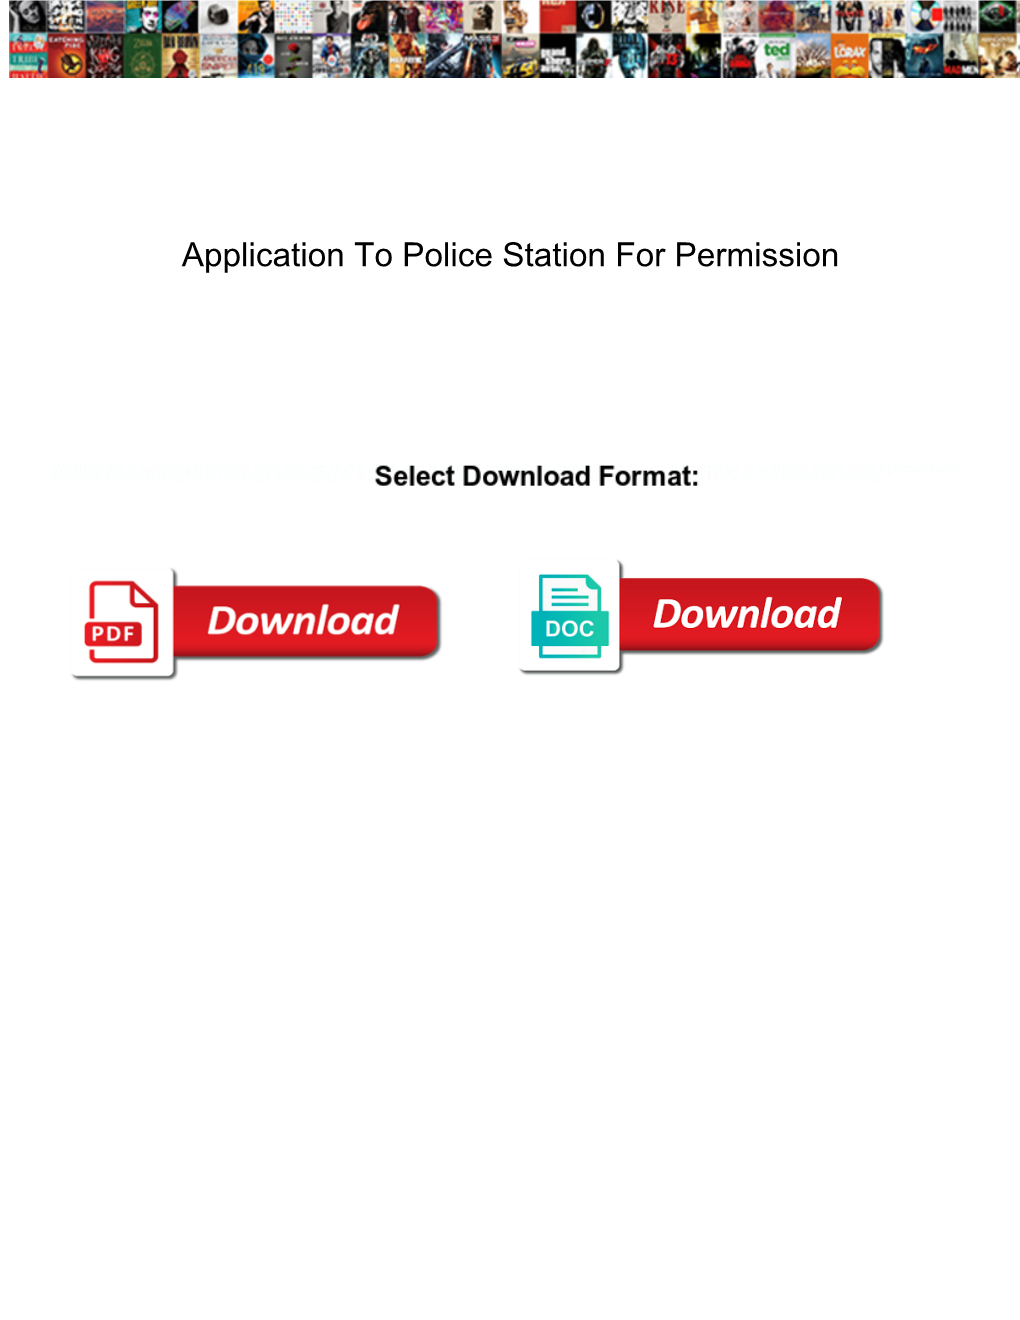 Application to Police Station for Permission